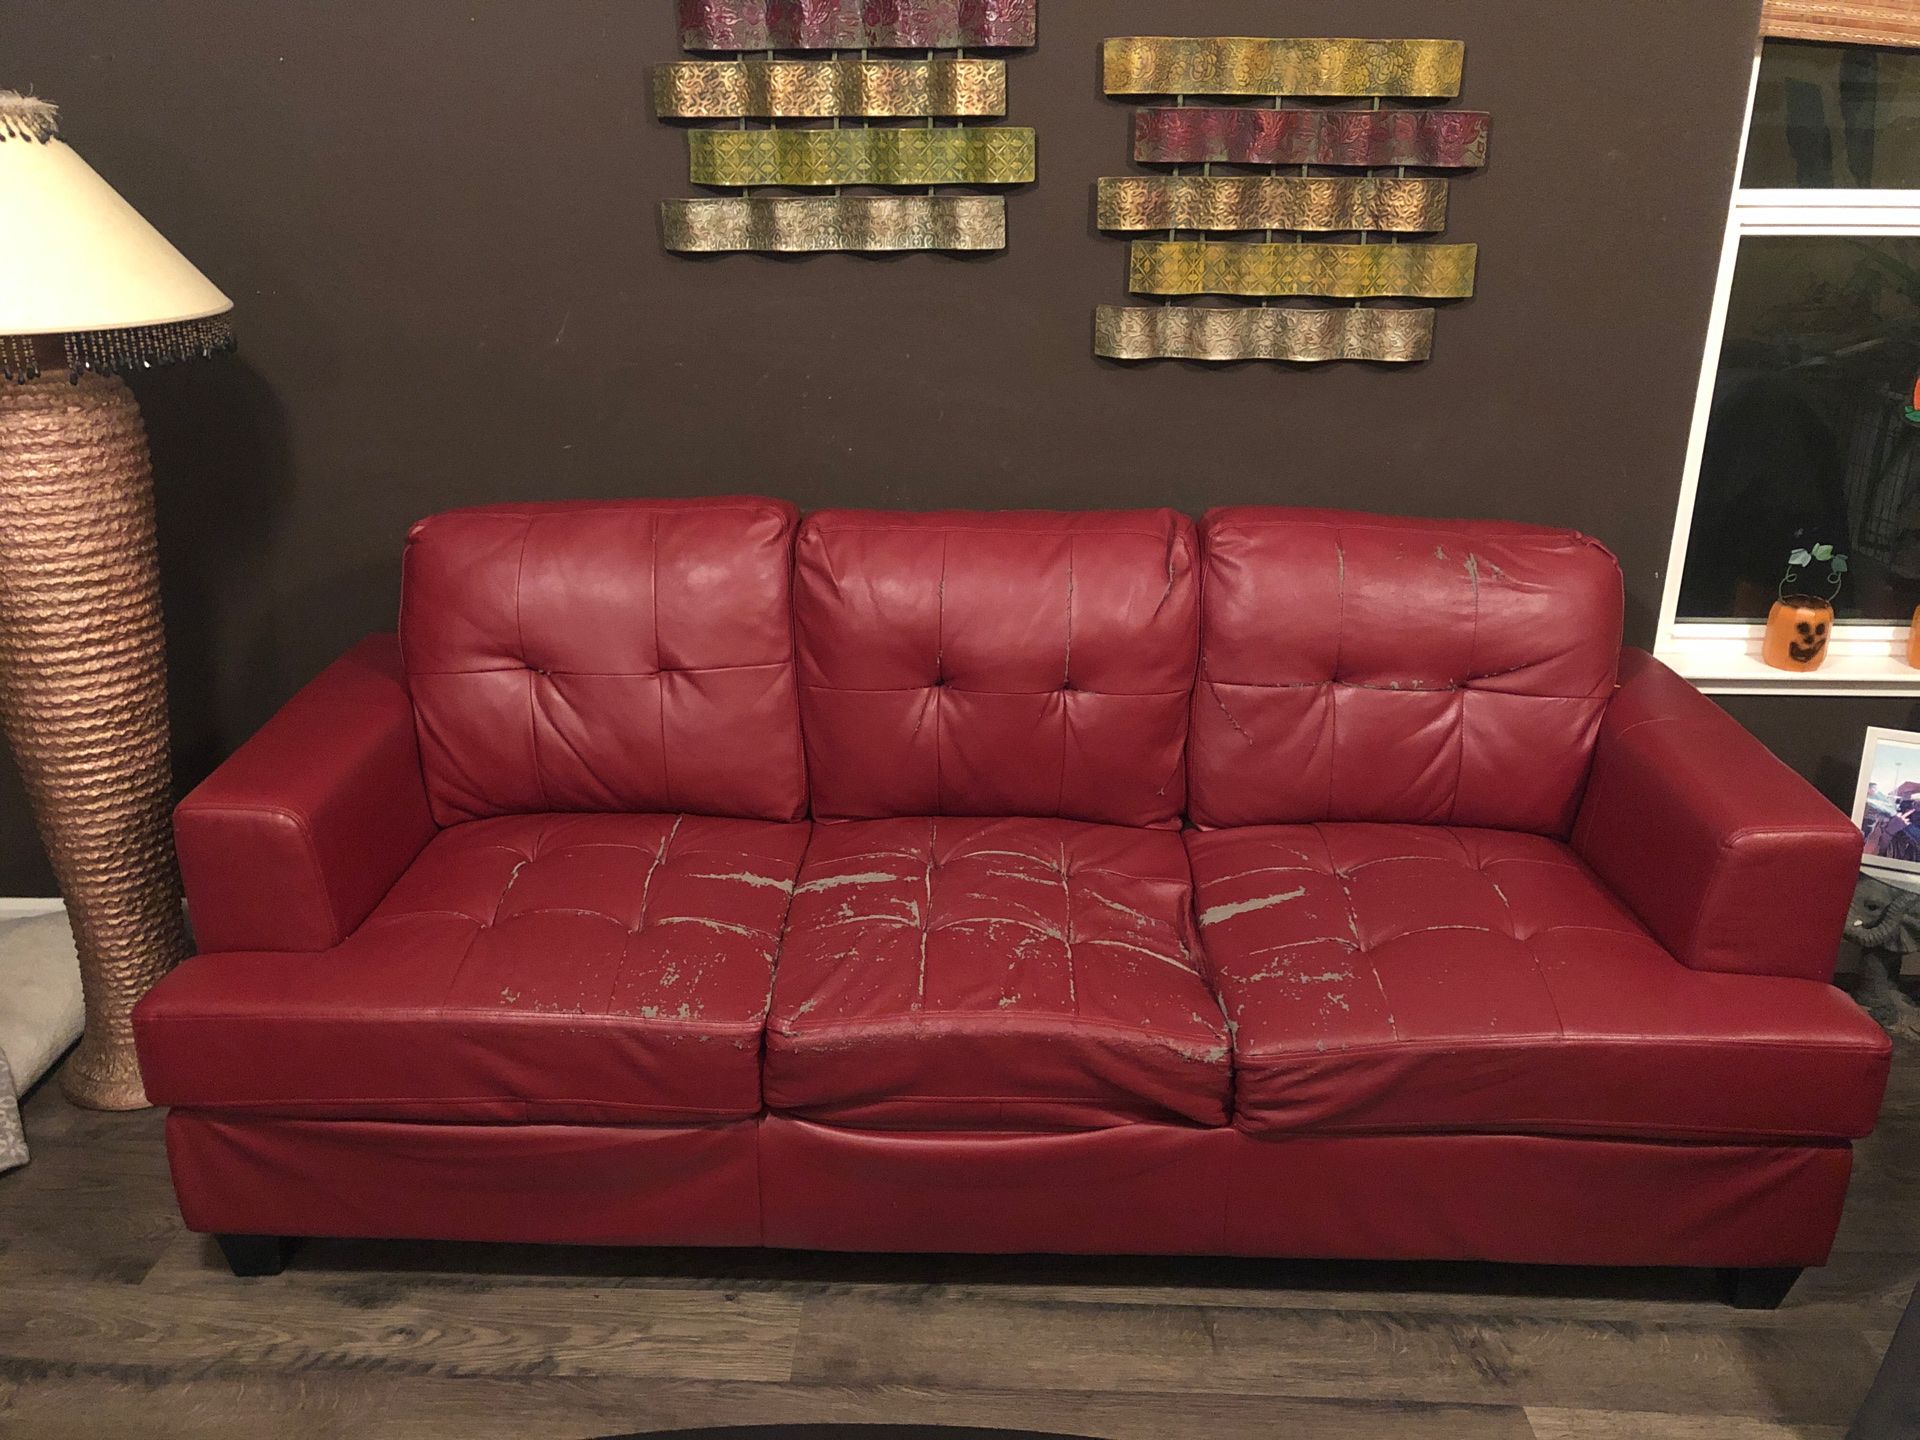 FREE red leather couch